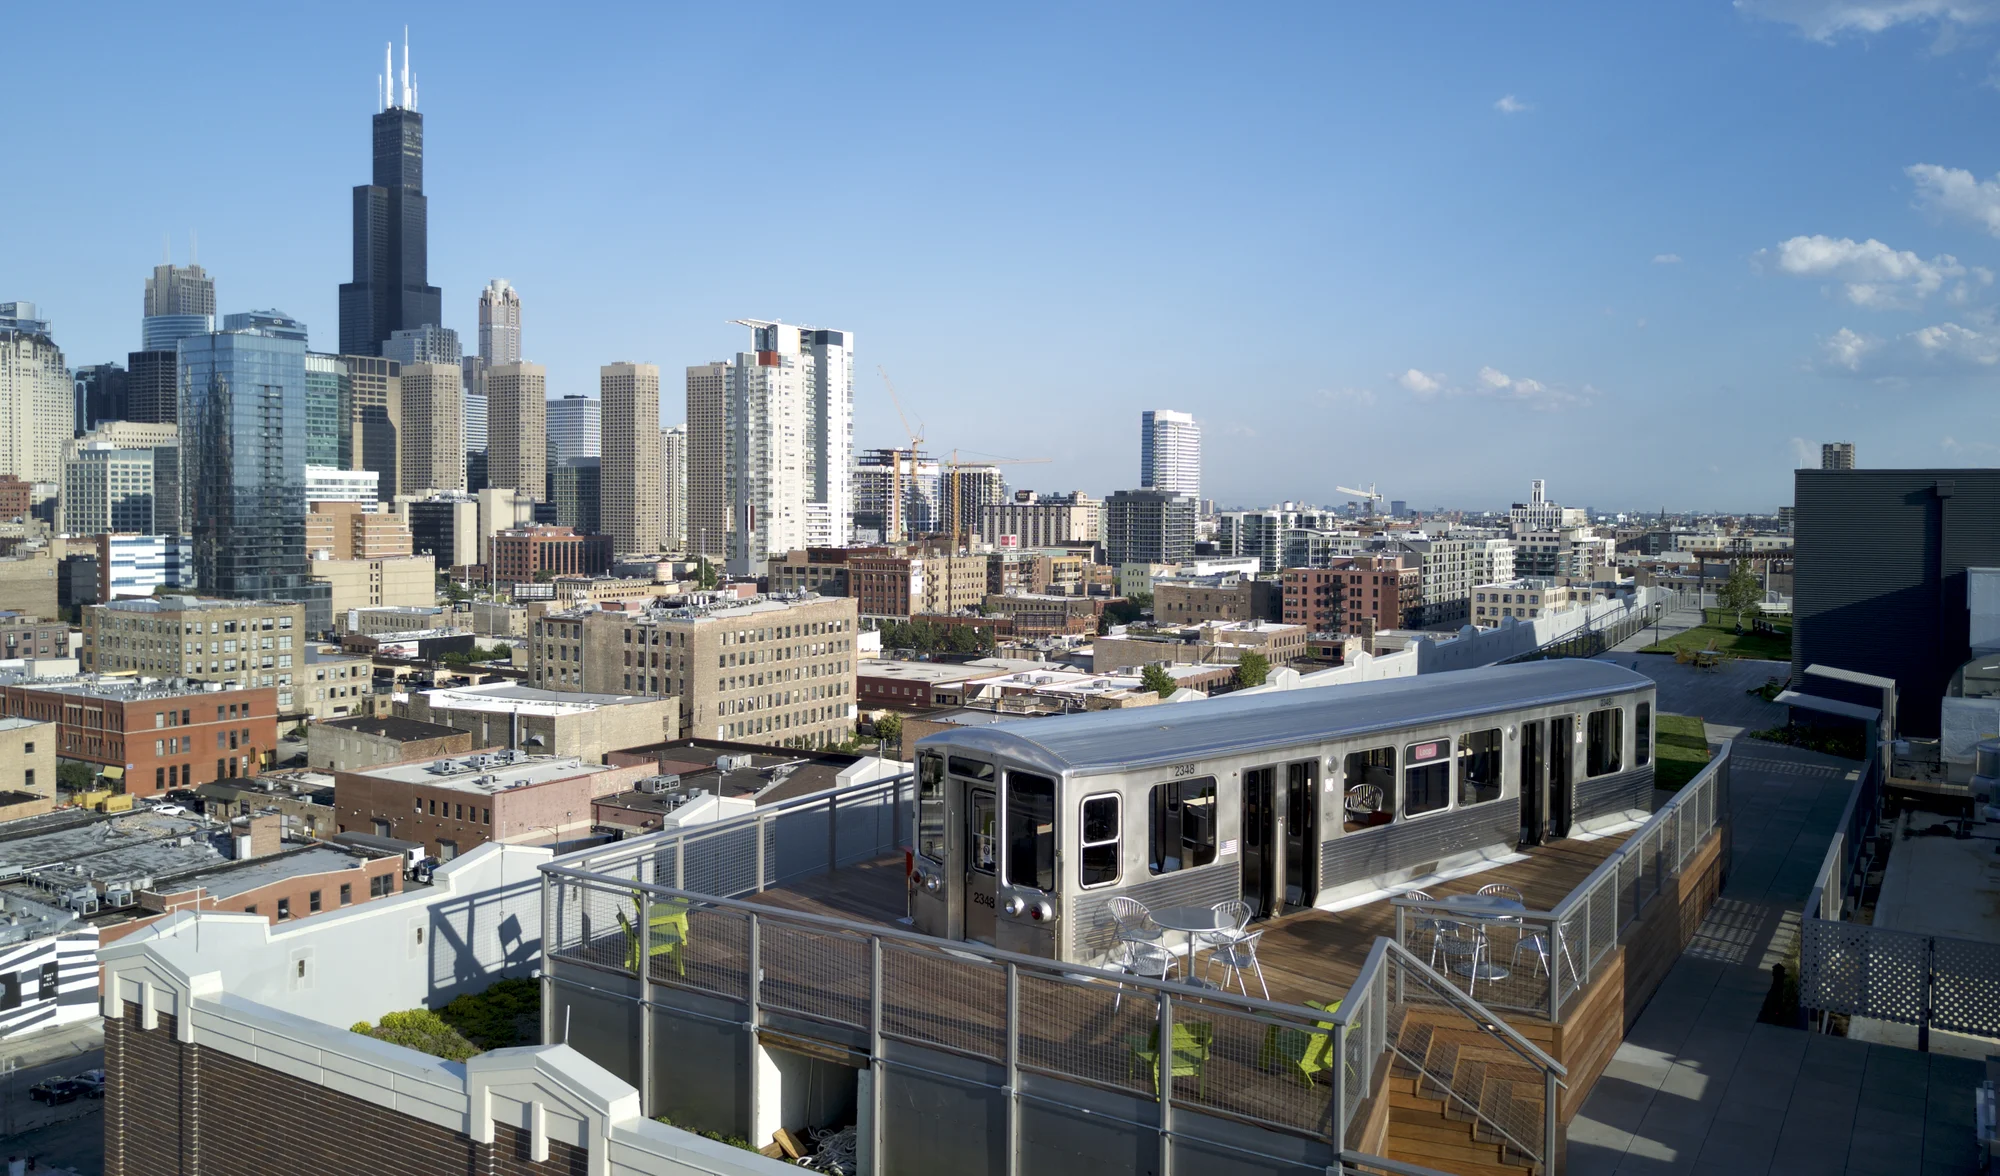 A rooftop overlooking the Chicago skyline with a silver train car. Next to the train are silver and green chairs and two silver tables. Around the rooftop is a balcony wall and a set of stairs that lead down to a second platform.